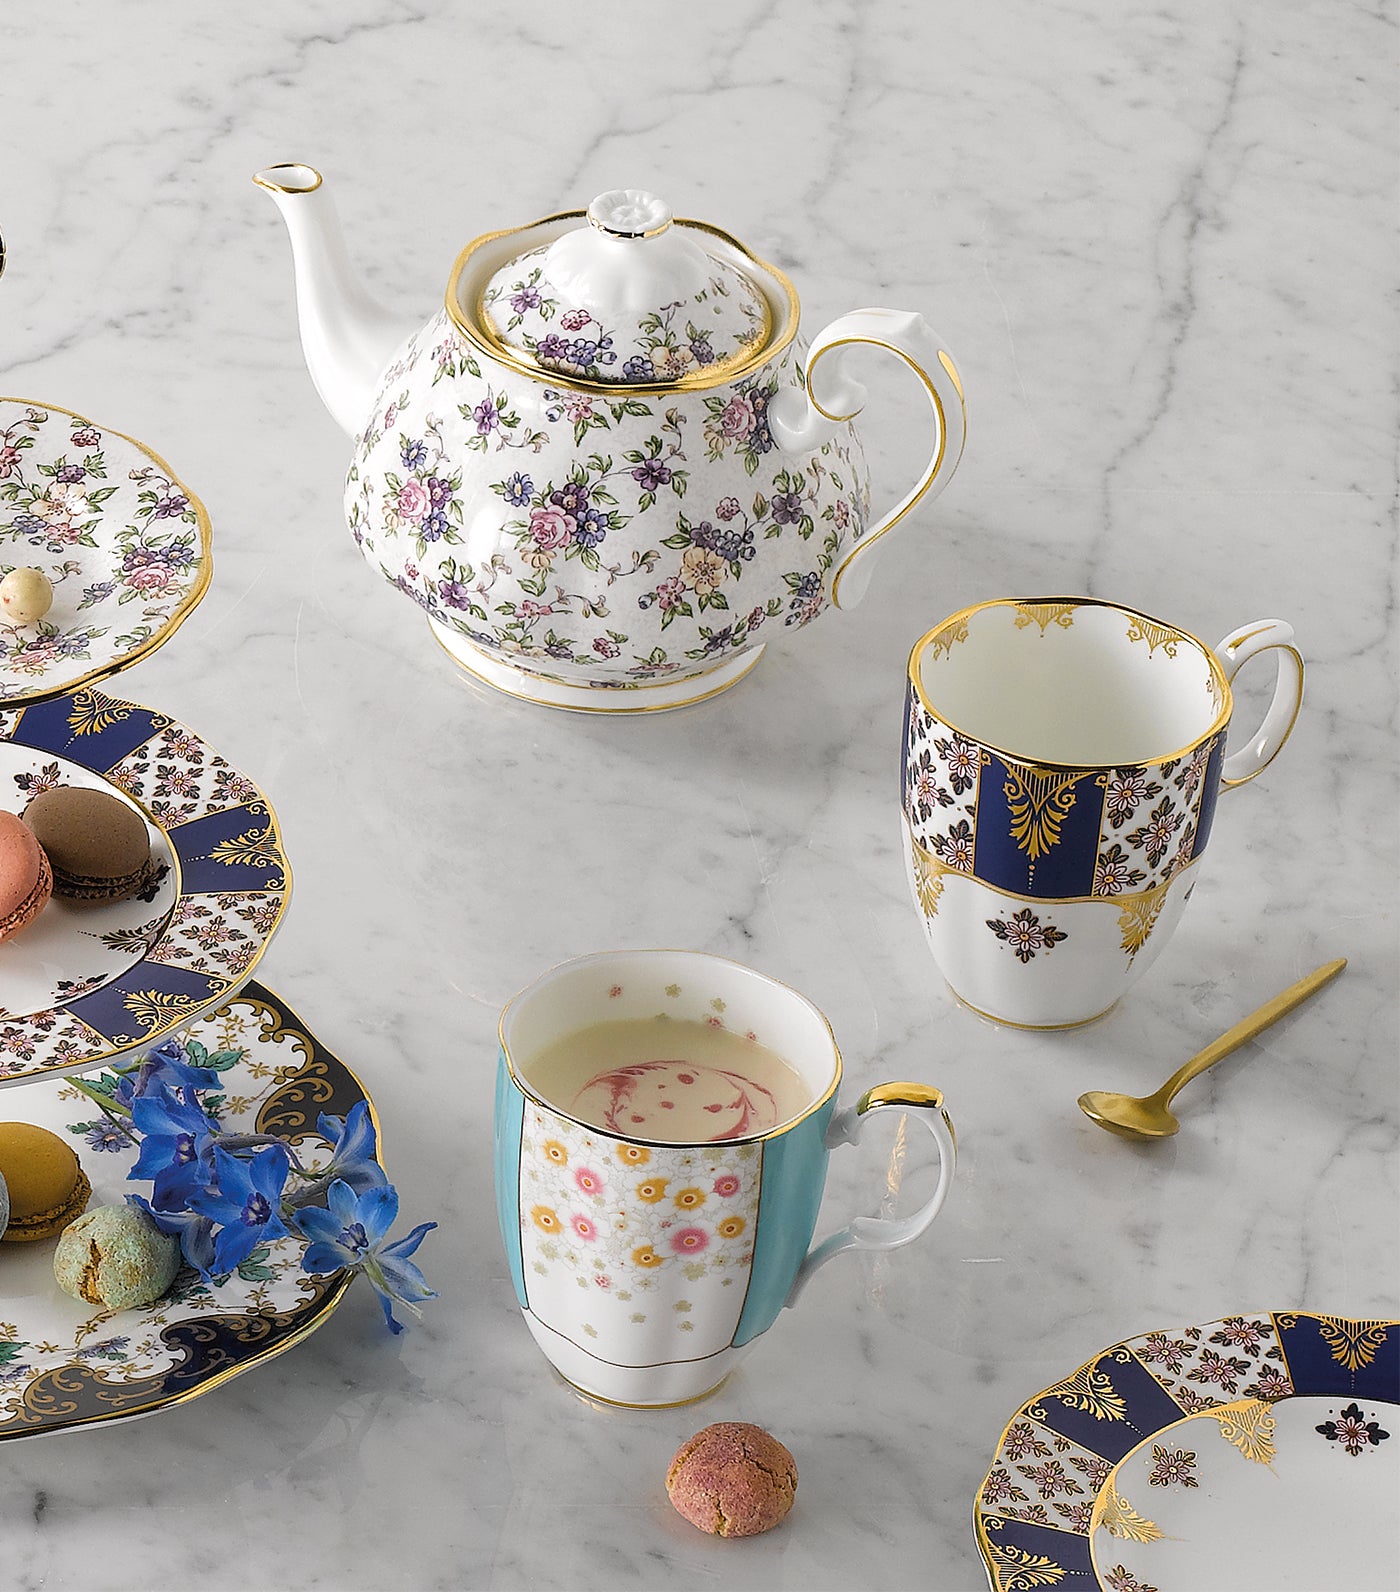 100 Years Of Royal Albert 1900-1940 Collection